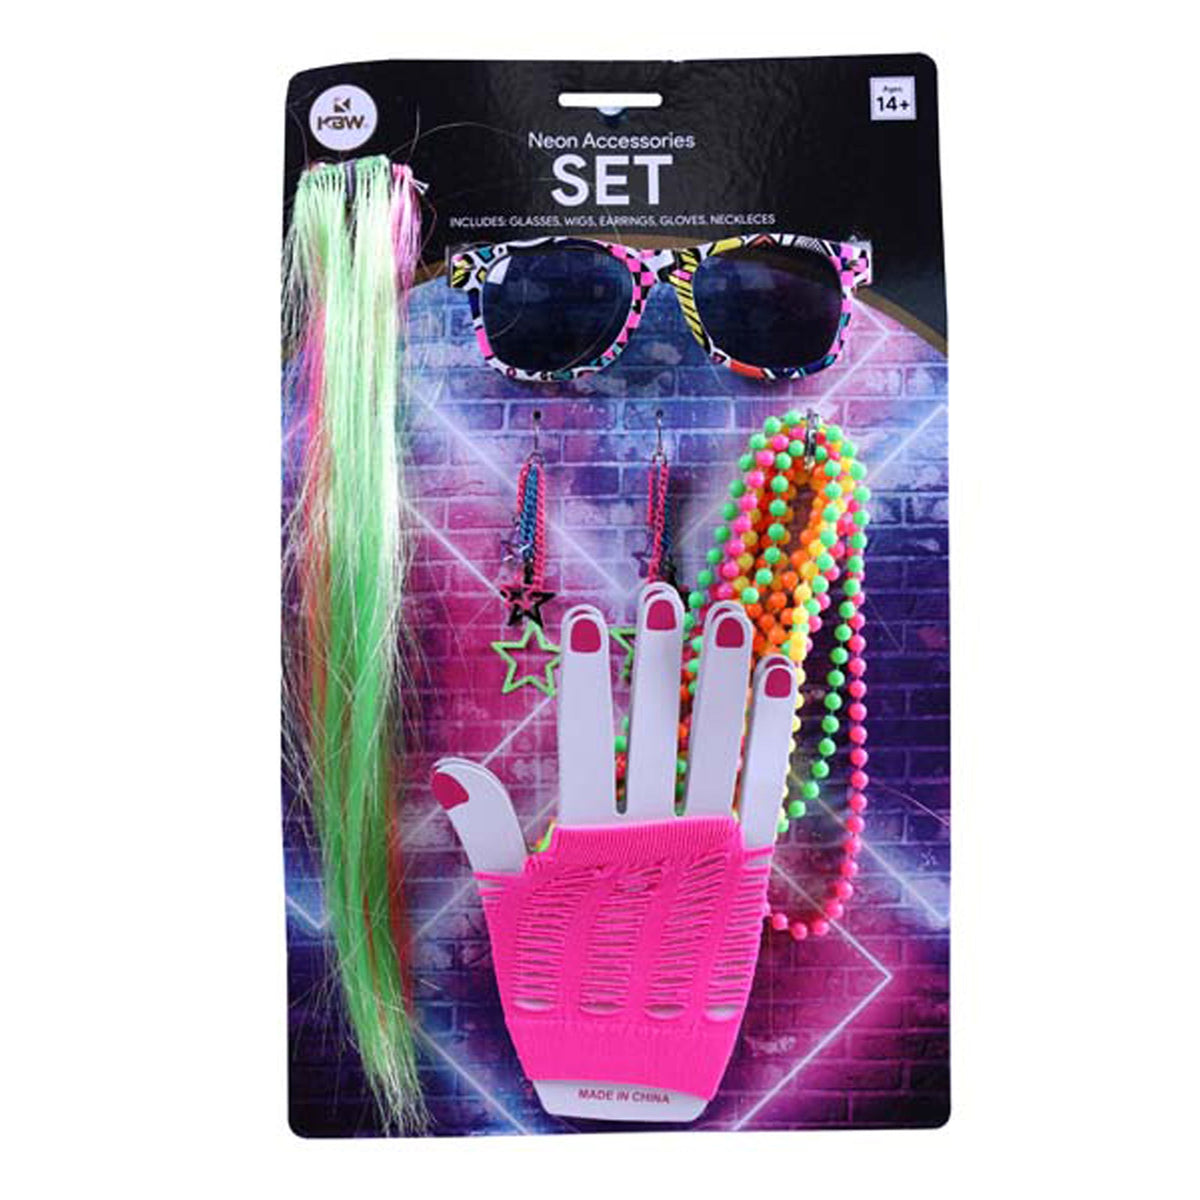 KBW GLOBAL CORP Costume Accessories 1980's Accessory Kit for Adults 831687030789